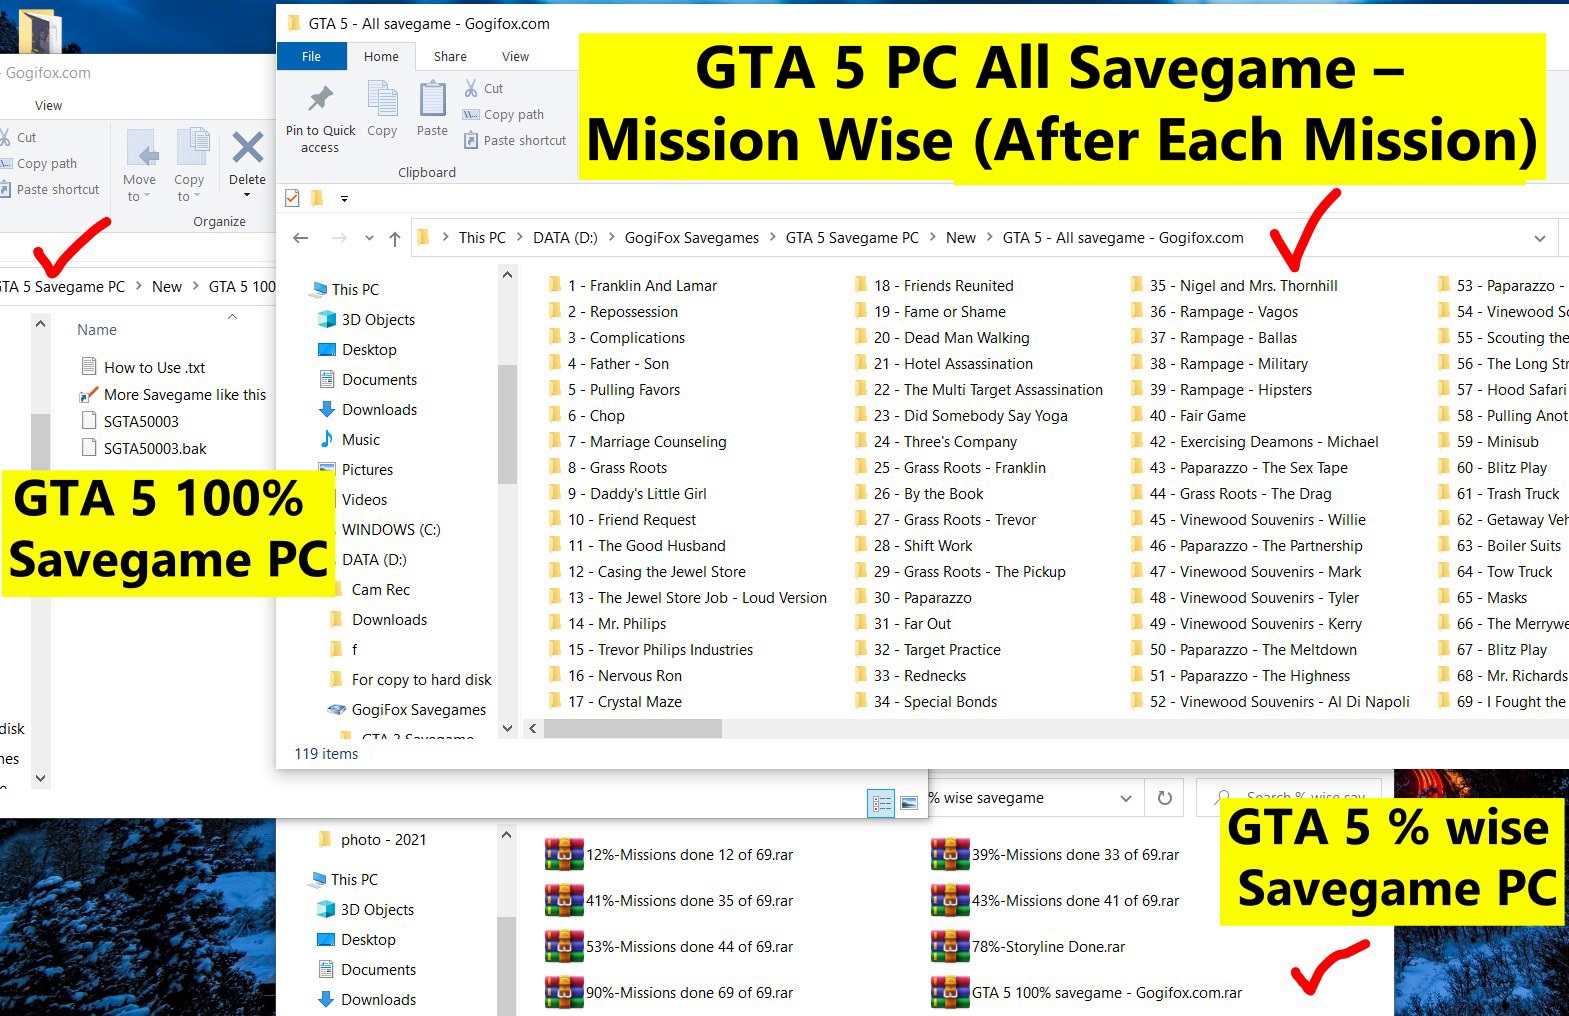 GTA 5 Savegame PC - 100% + Mission Wise (After Each Mission) + % Wise savegame - 12%,39%, 41%,43%, 53%,78%, 90%,100% etc